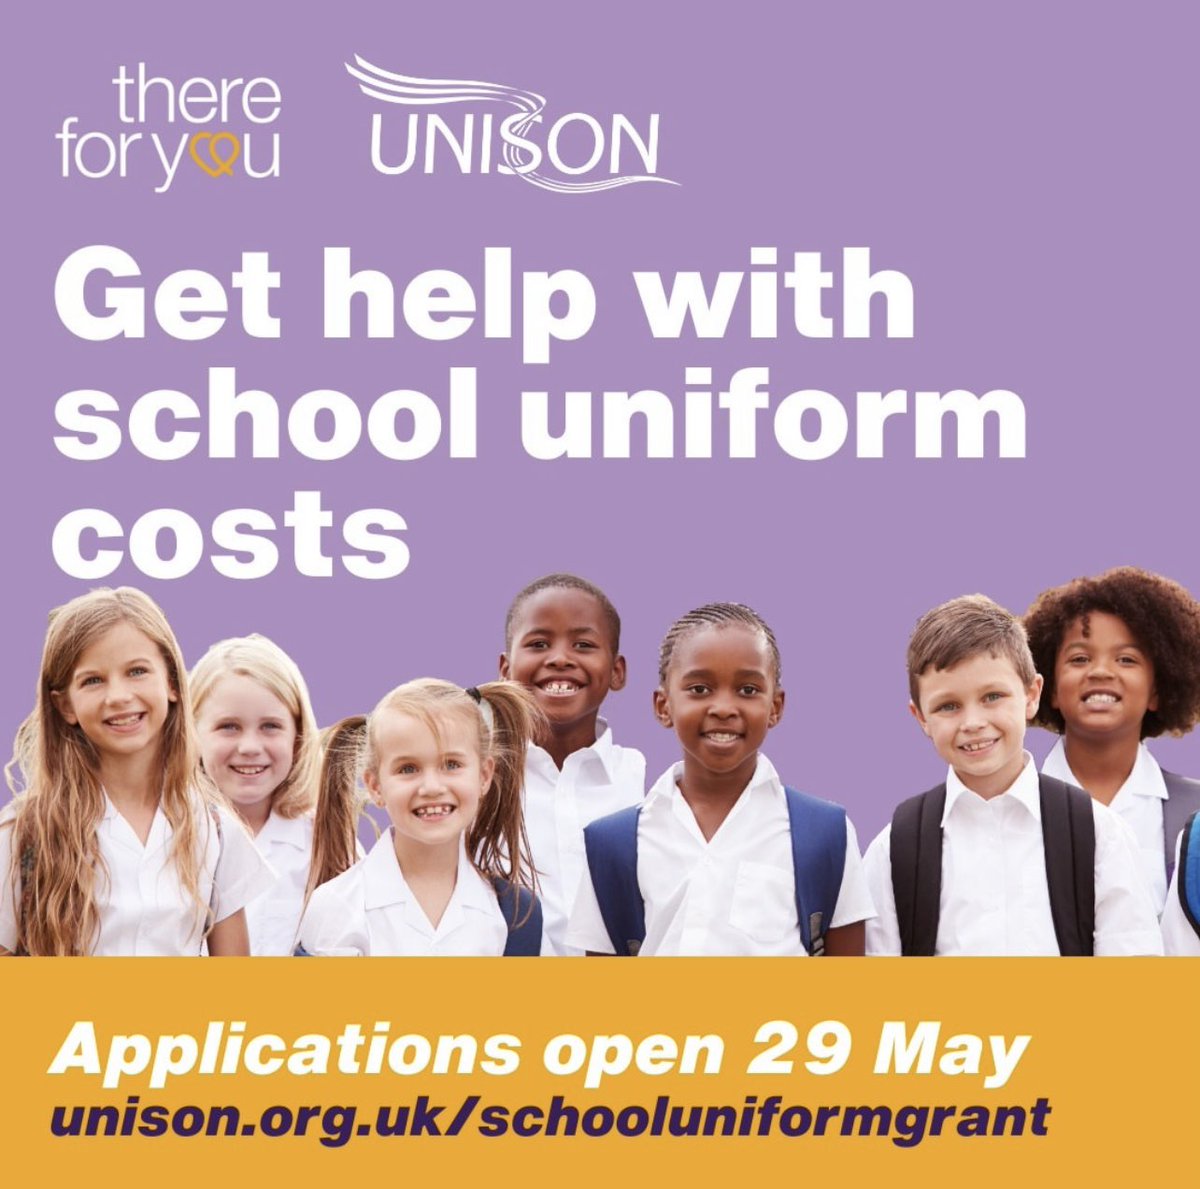 If you are on a low income and need support with school uniform costs, you may be eligible for up to £75 voucher per child. @unisontheunion there for you 💚